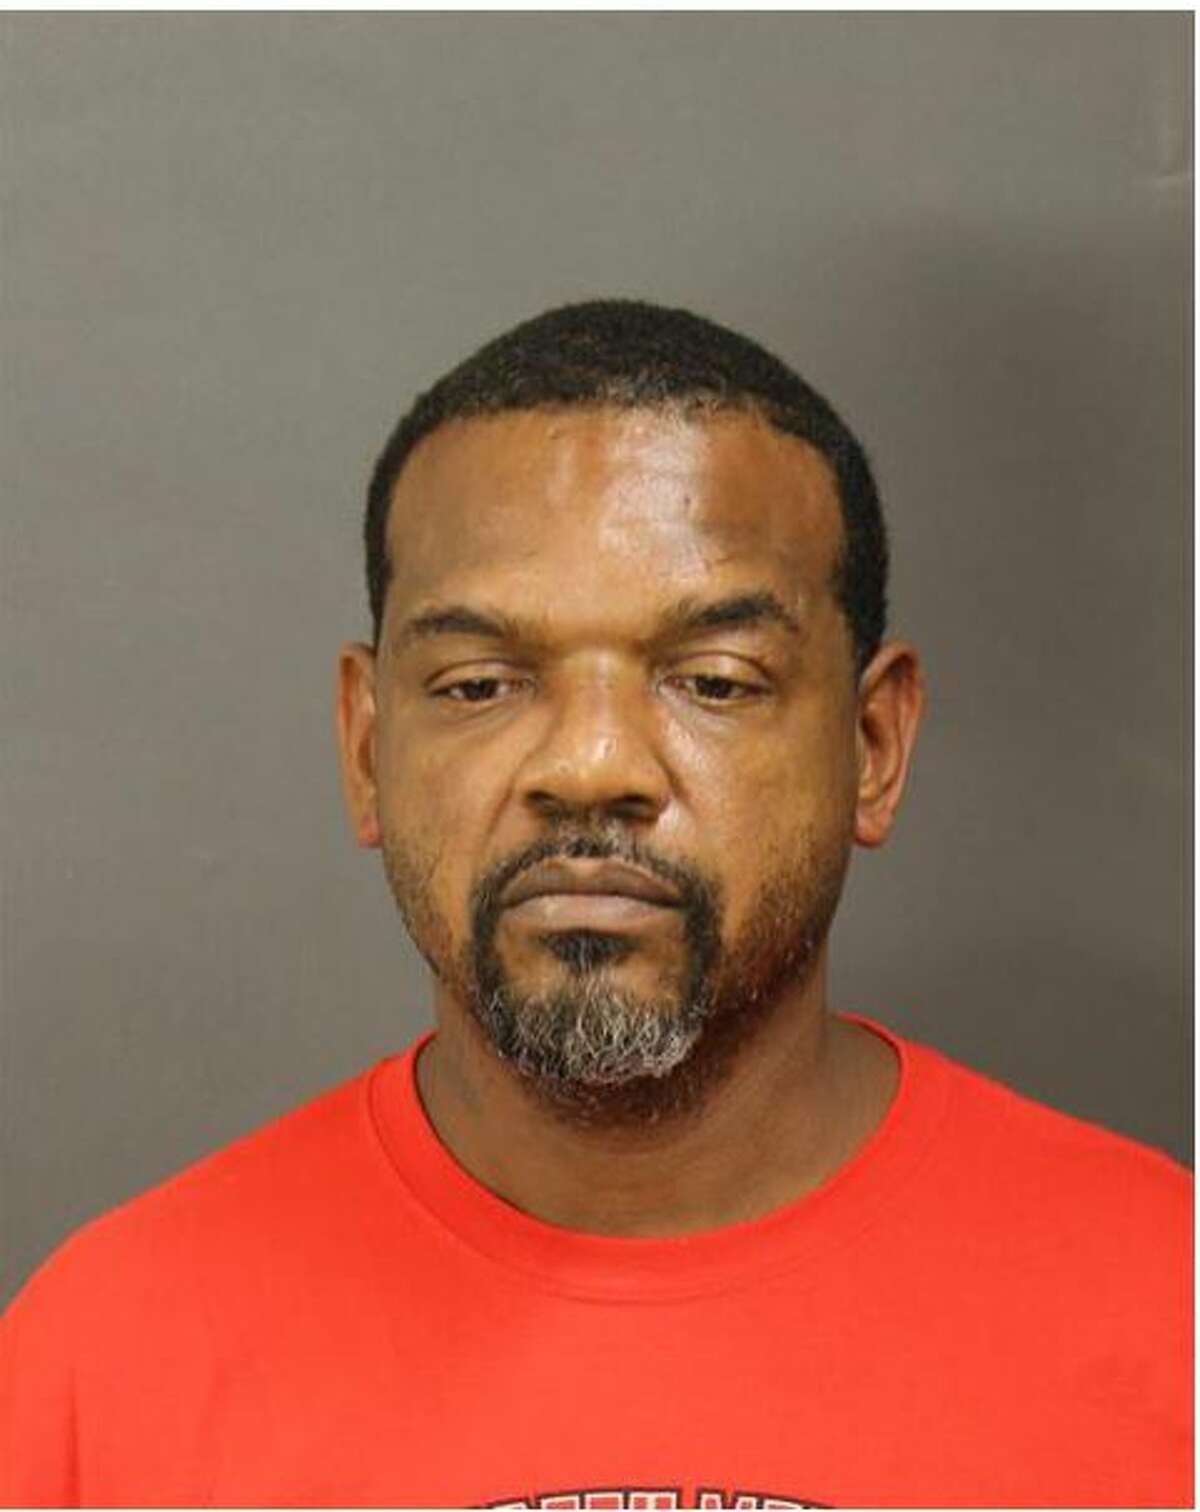 Henry Carr was charged with murder Aug. 29 in connection with a deadly shooting at a Baytown motel.